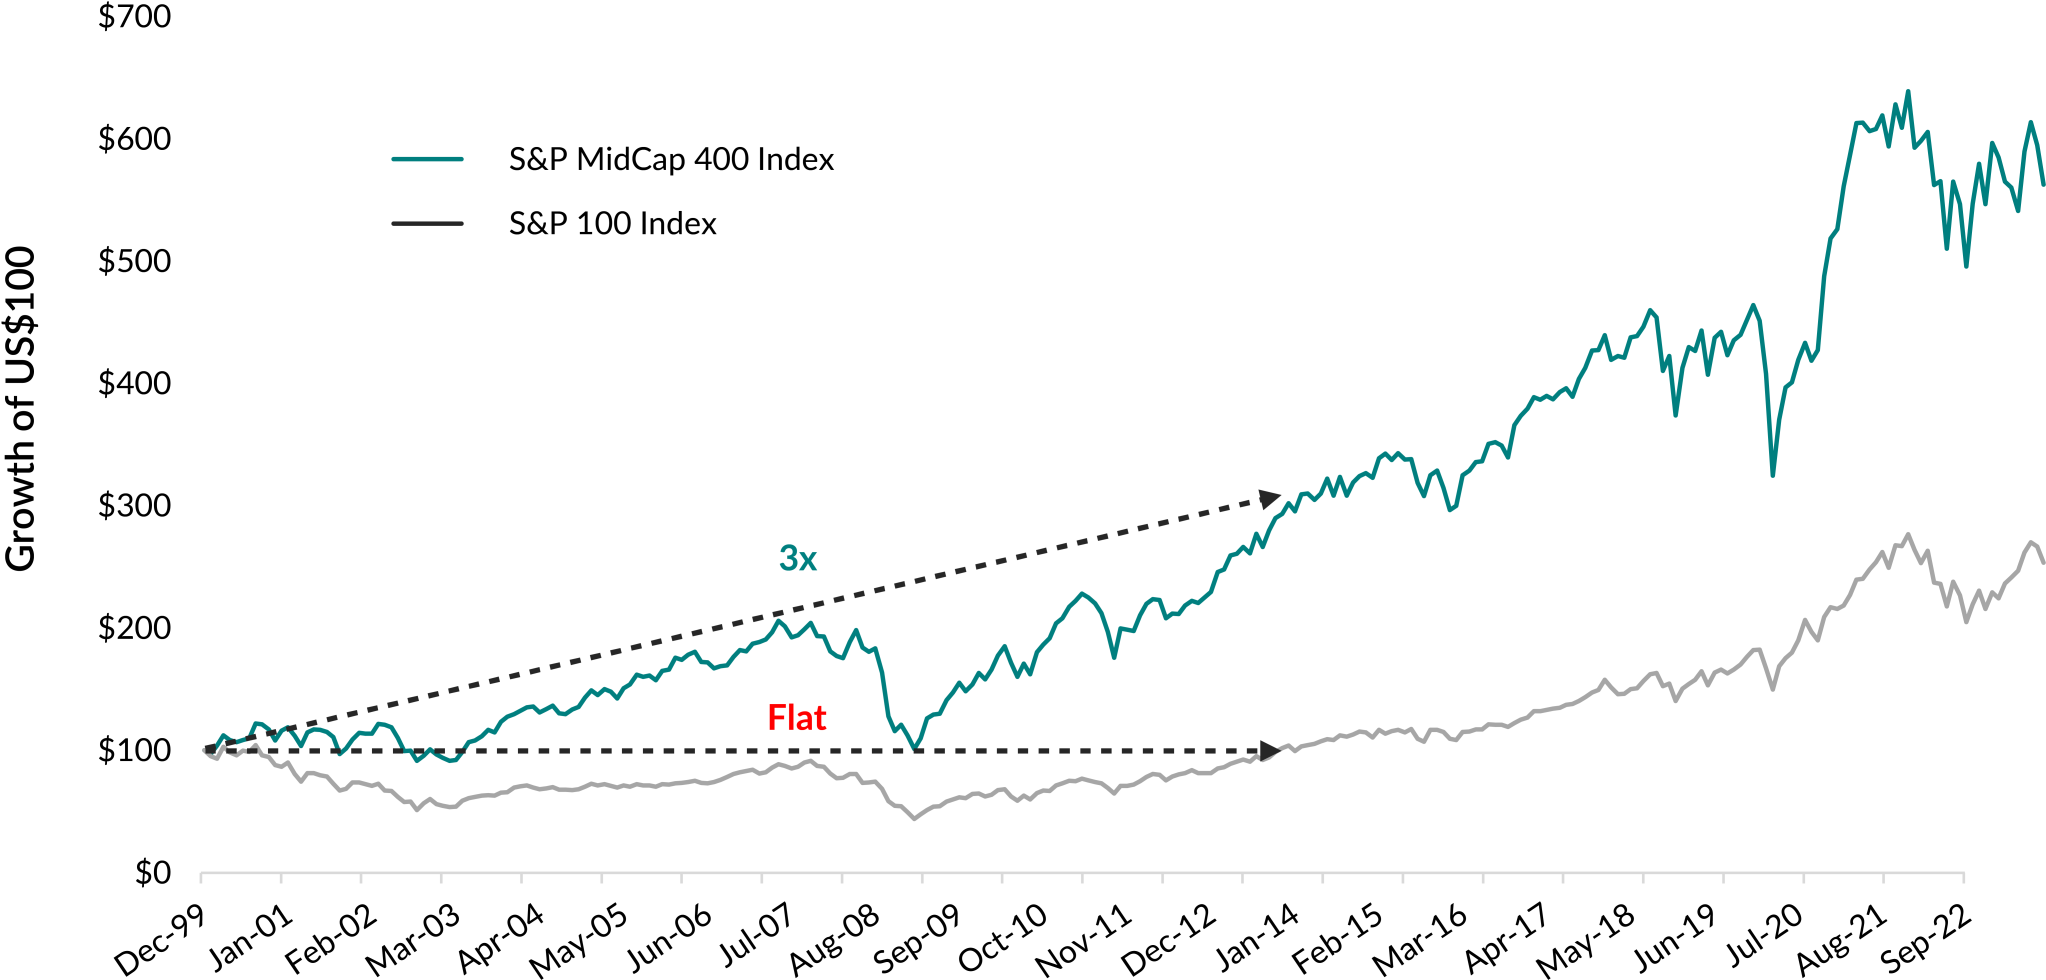 A chart showing the growth of $100 invested in the S&P MidCap 400 Index and the S&P 100 Index between December 31, 1999 to September 30, 2023. The mid-cap index tripled in value from the start of the period until early 2014, while the S&P 100 Index remained relatively flat. At the end of the period, the mid-cap index investment would have been worth over $500 compared to about $200 for the S&P 100 investment.